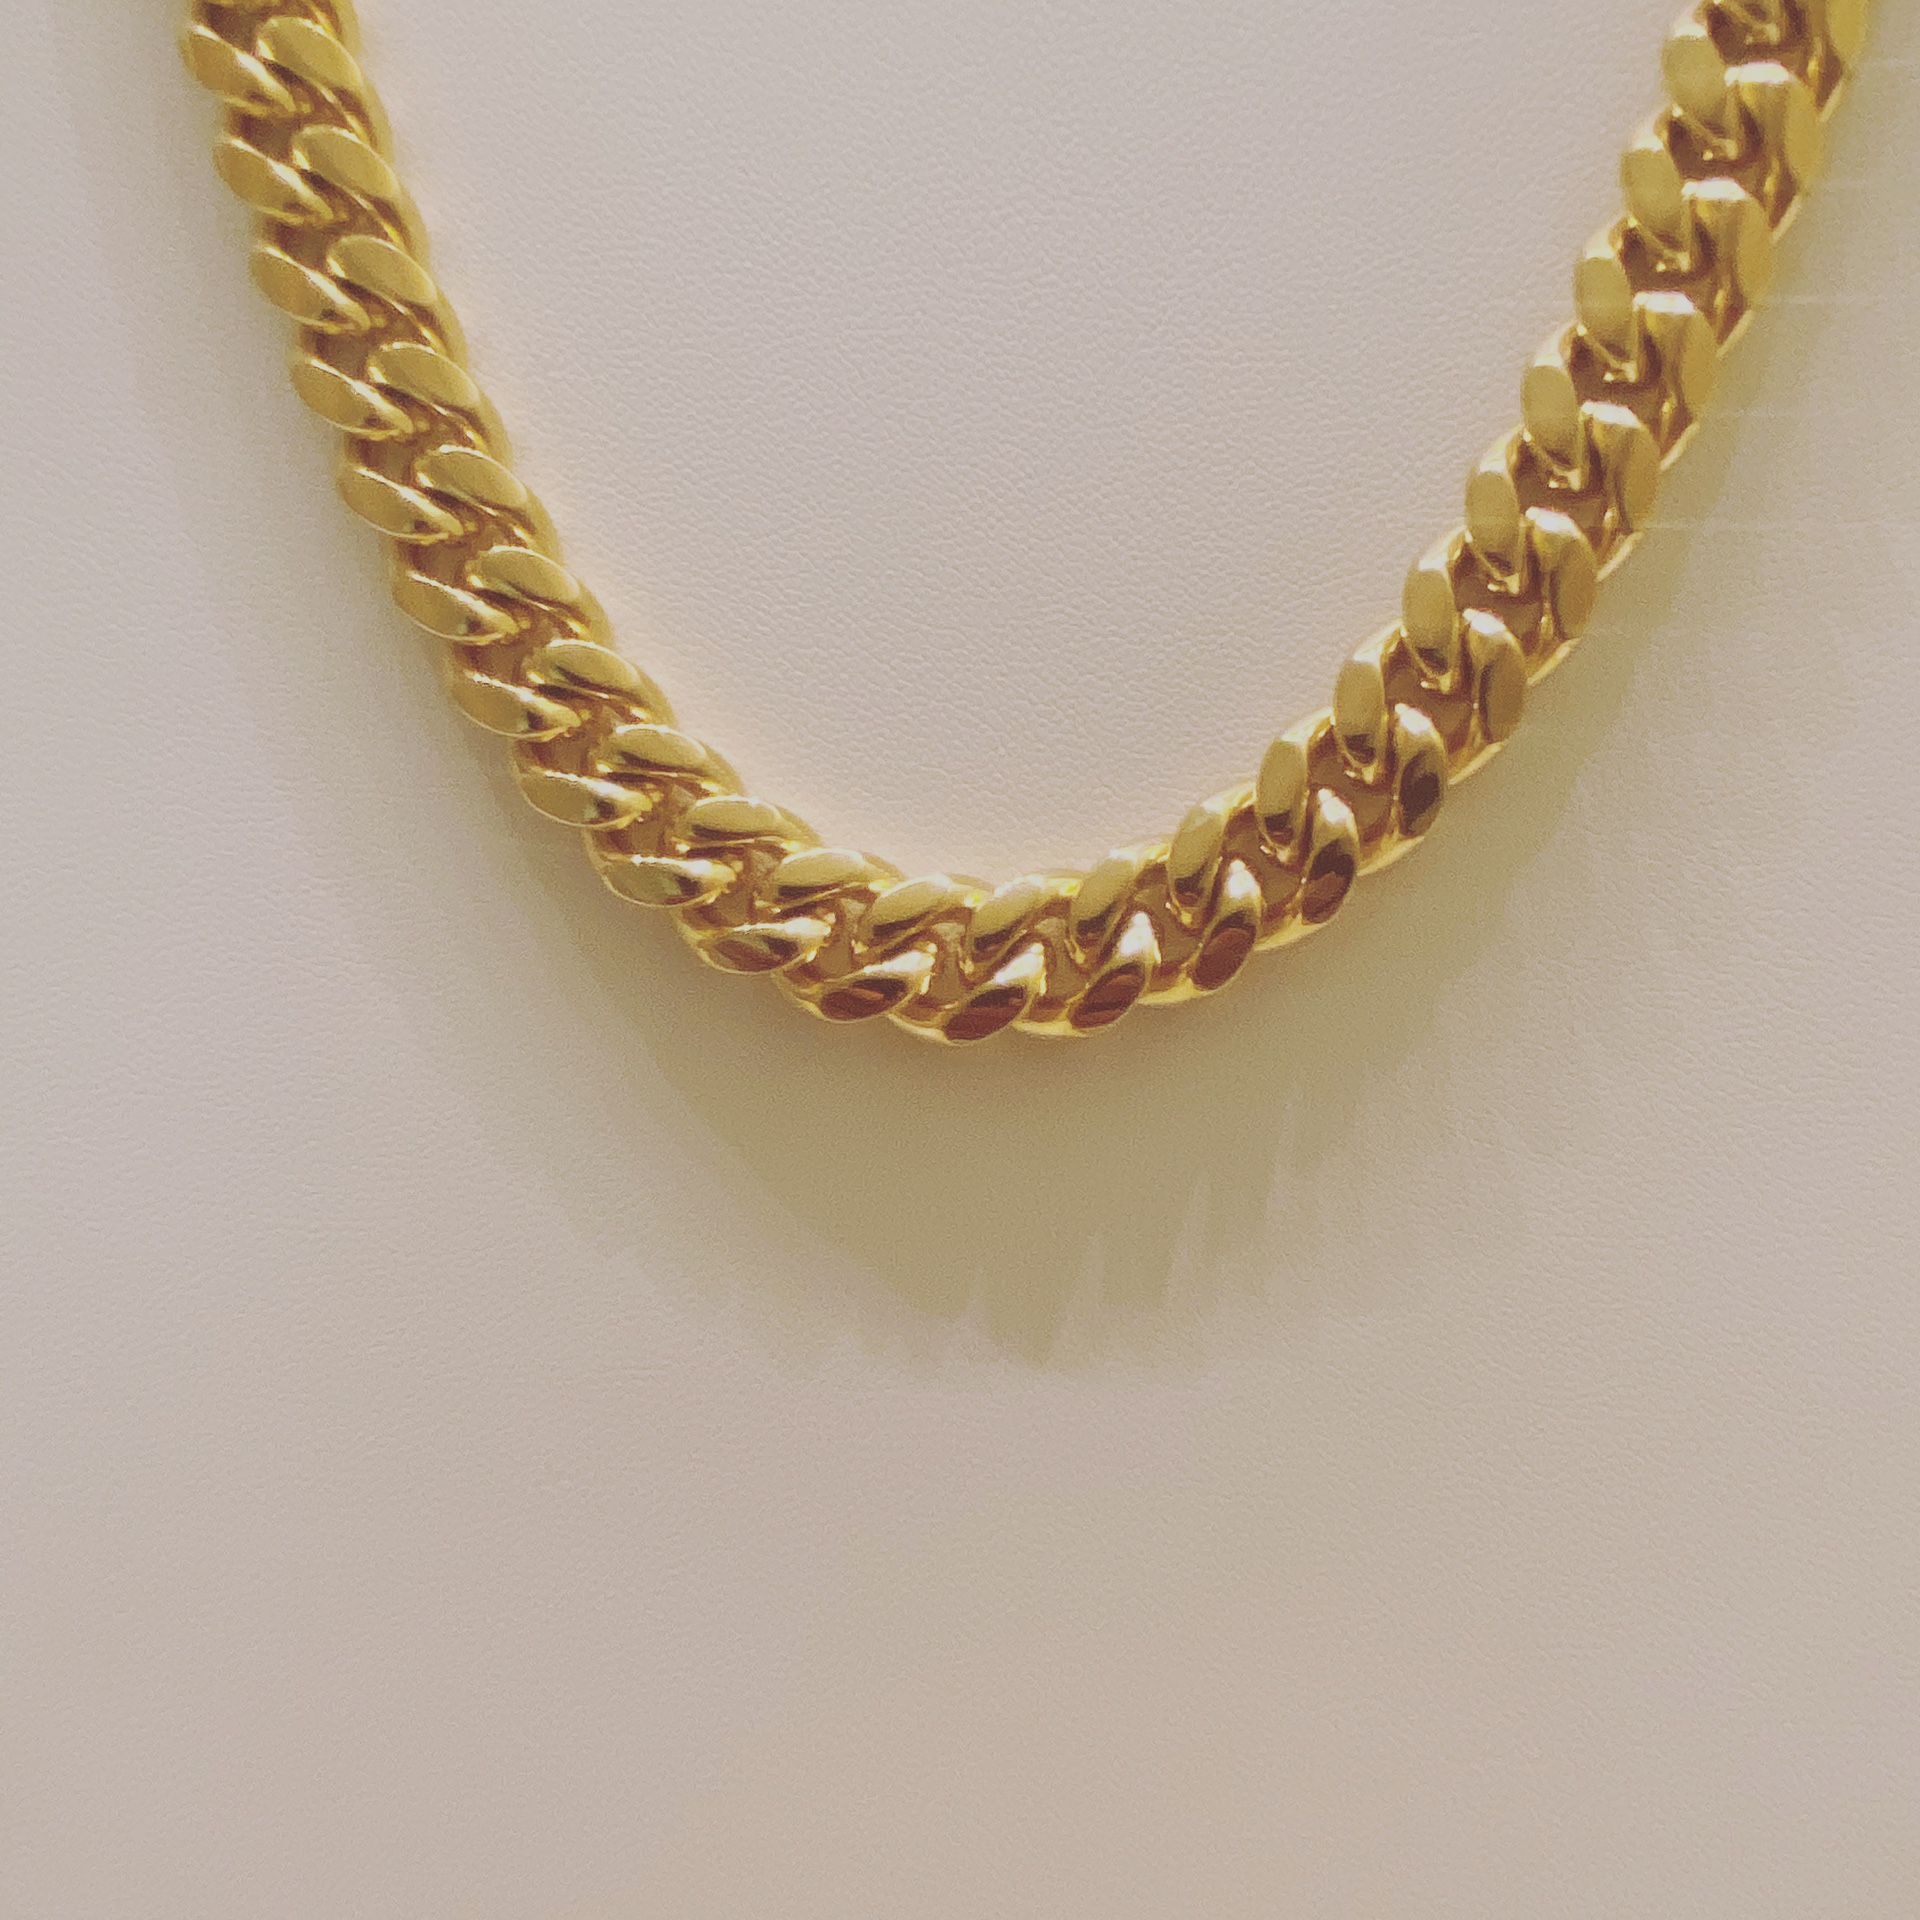 Gold stainless steel Cuban link chain